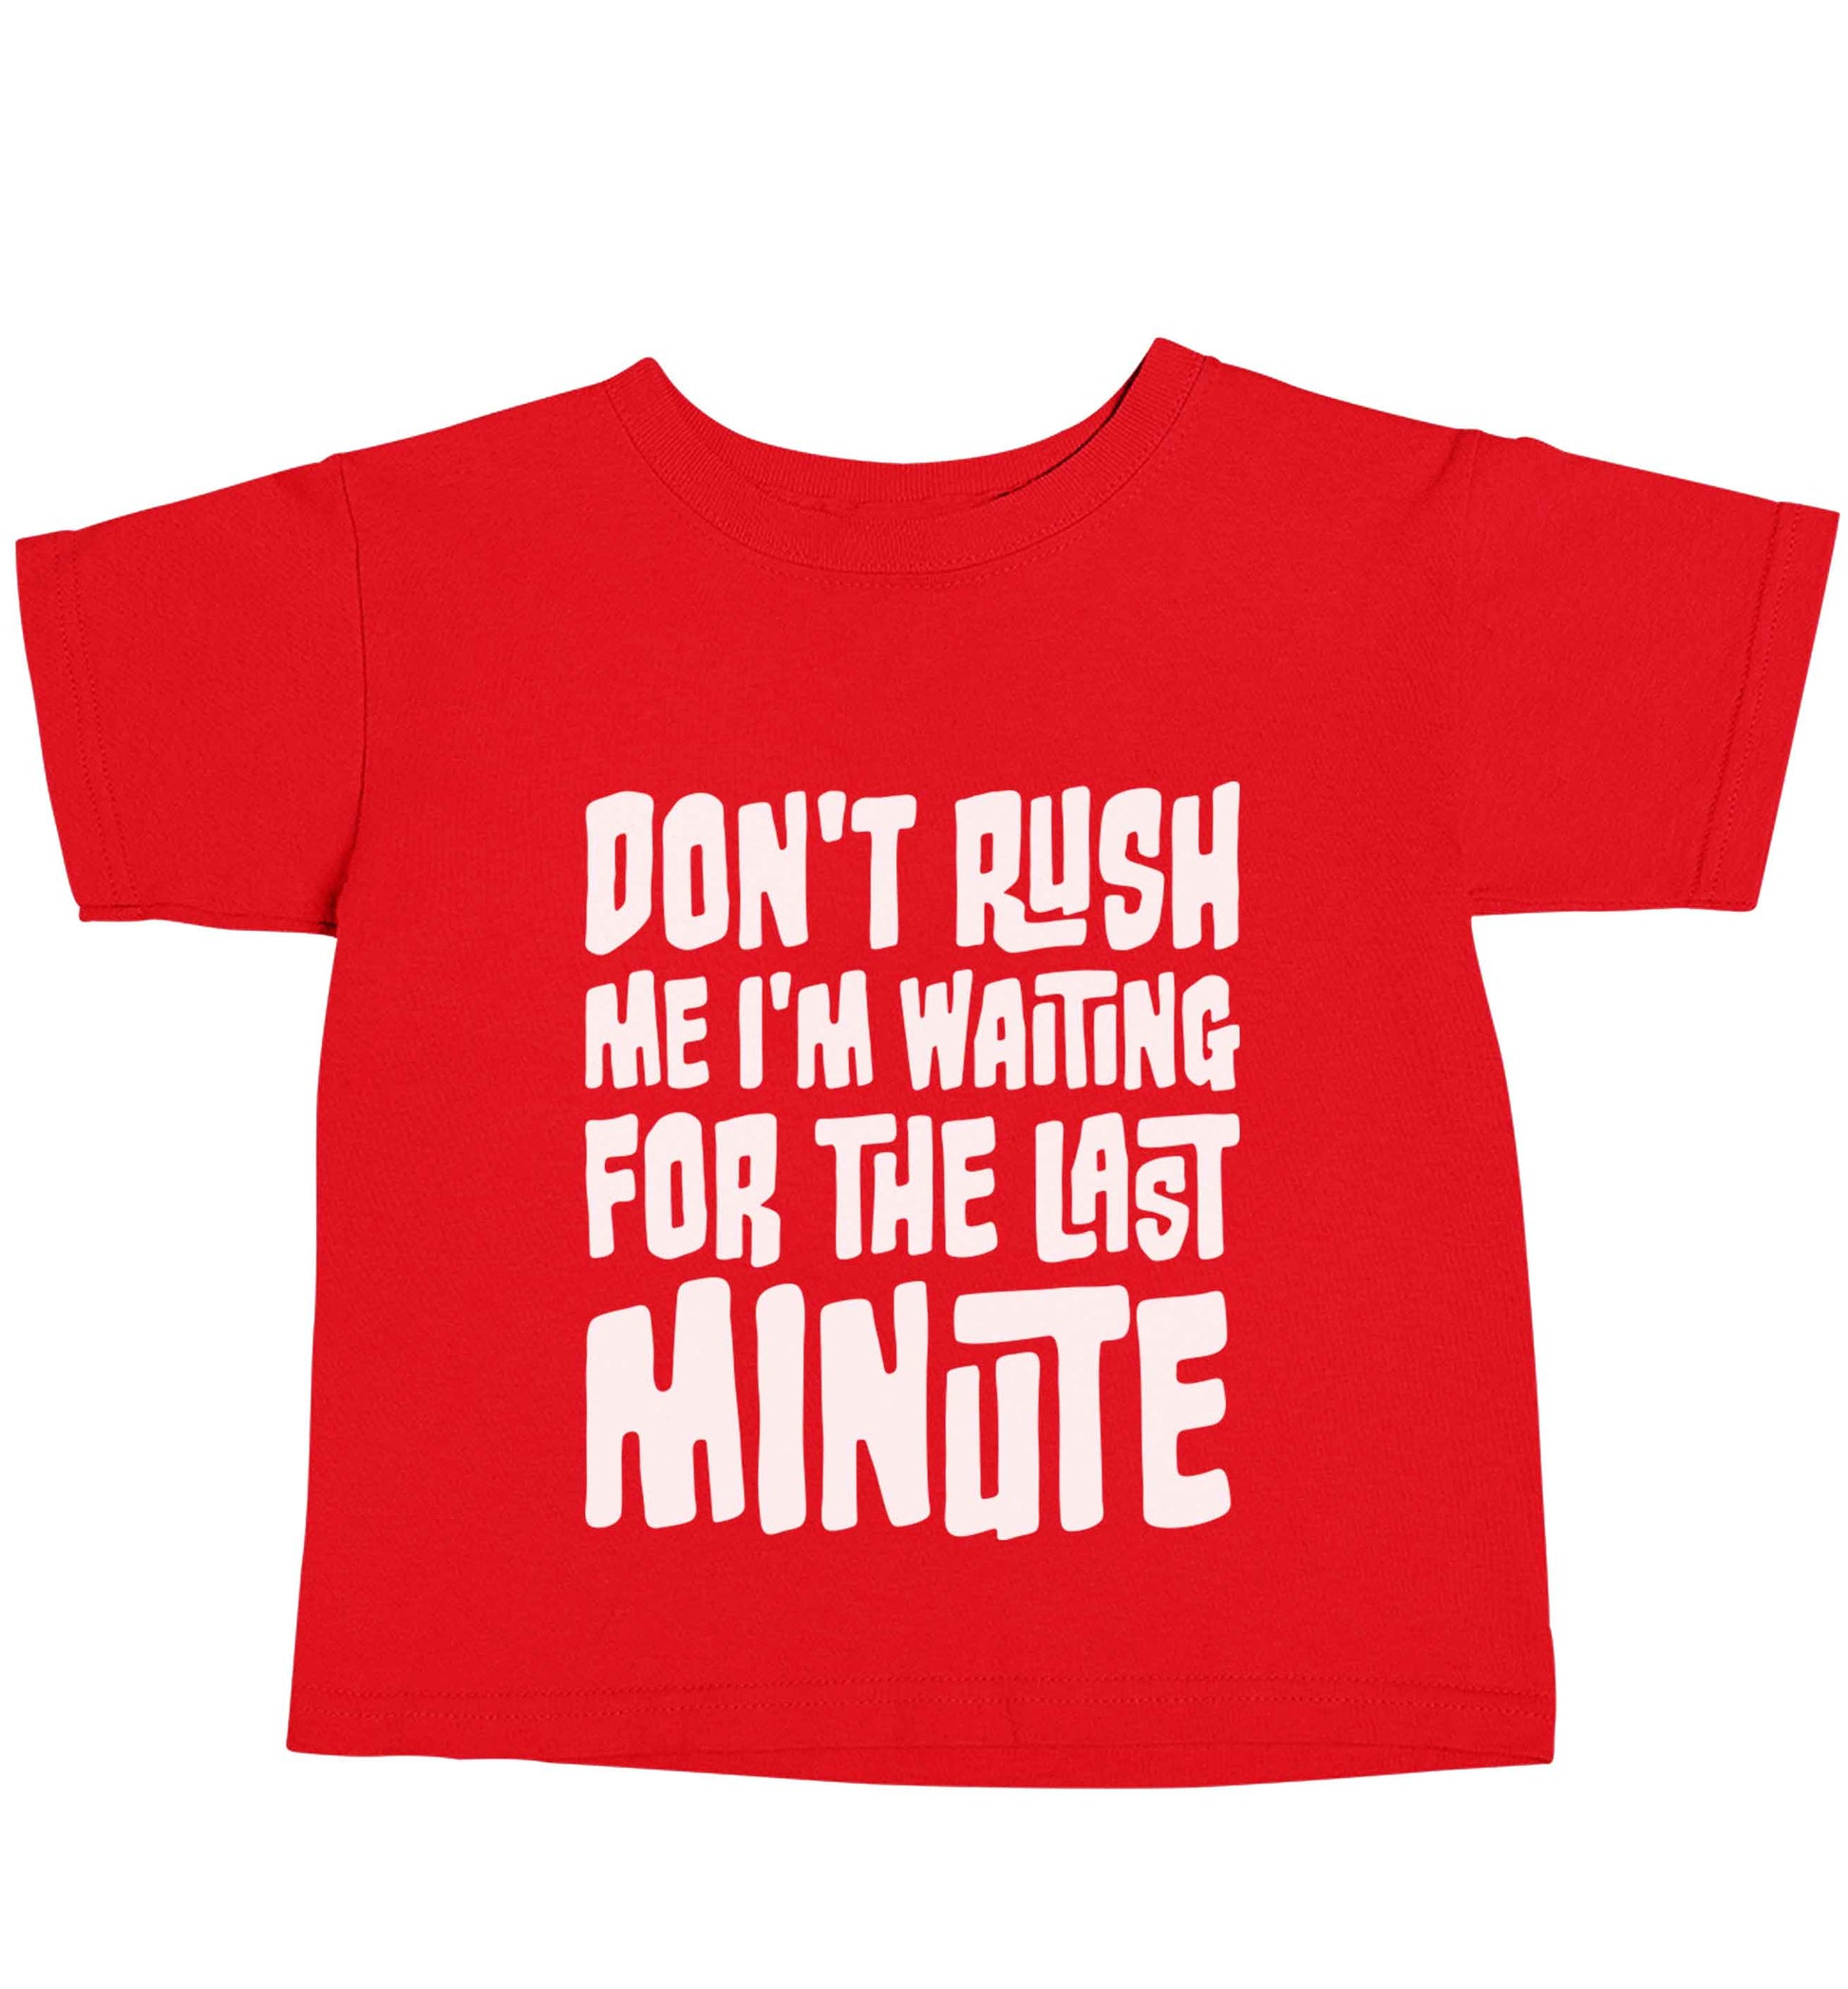 Don't rush me I'm waiting for the last minute red baby toddler Tshirt 2 Years